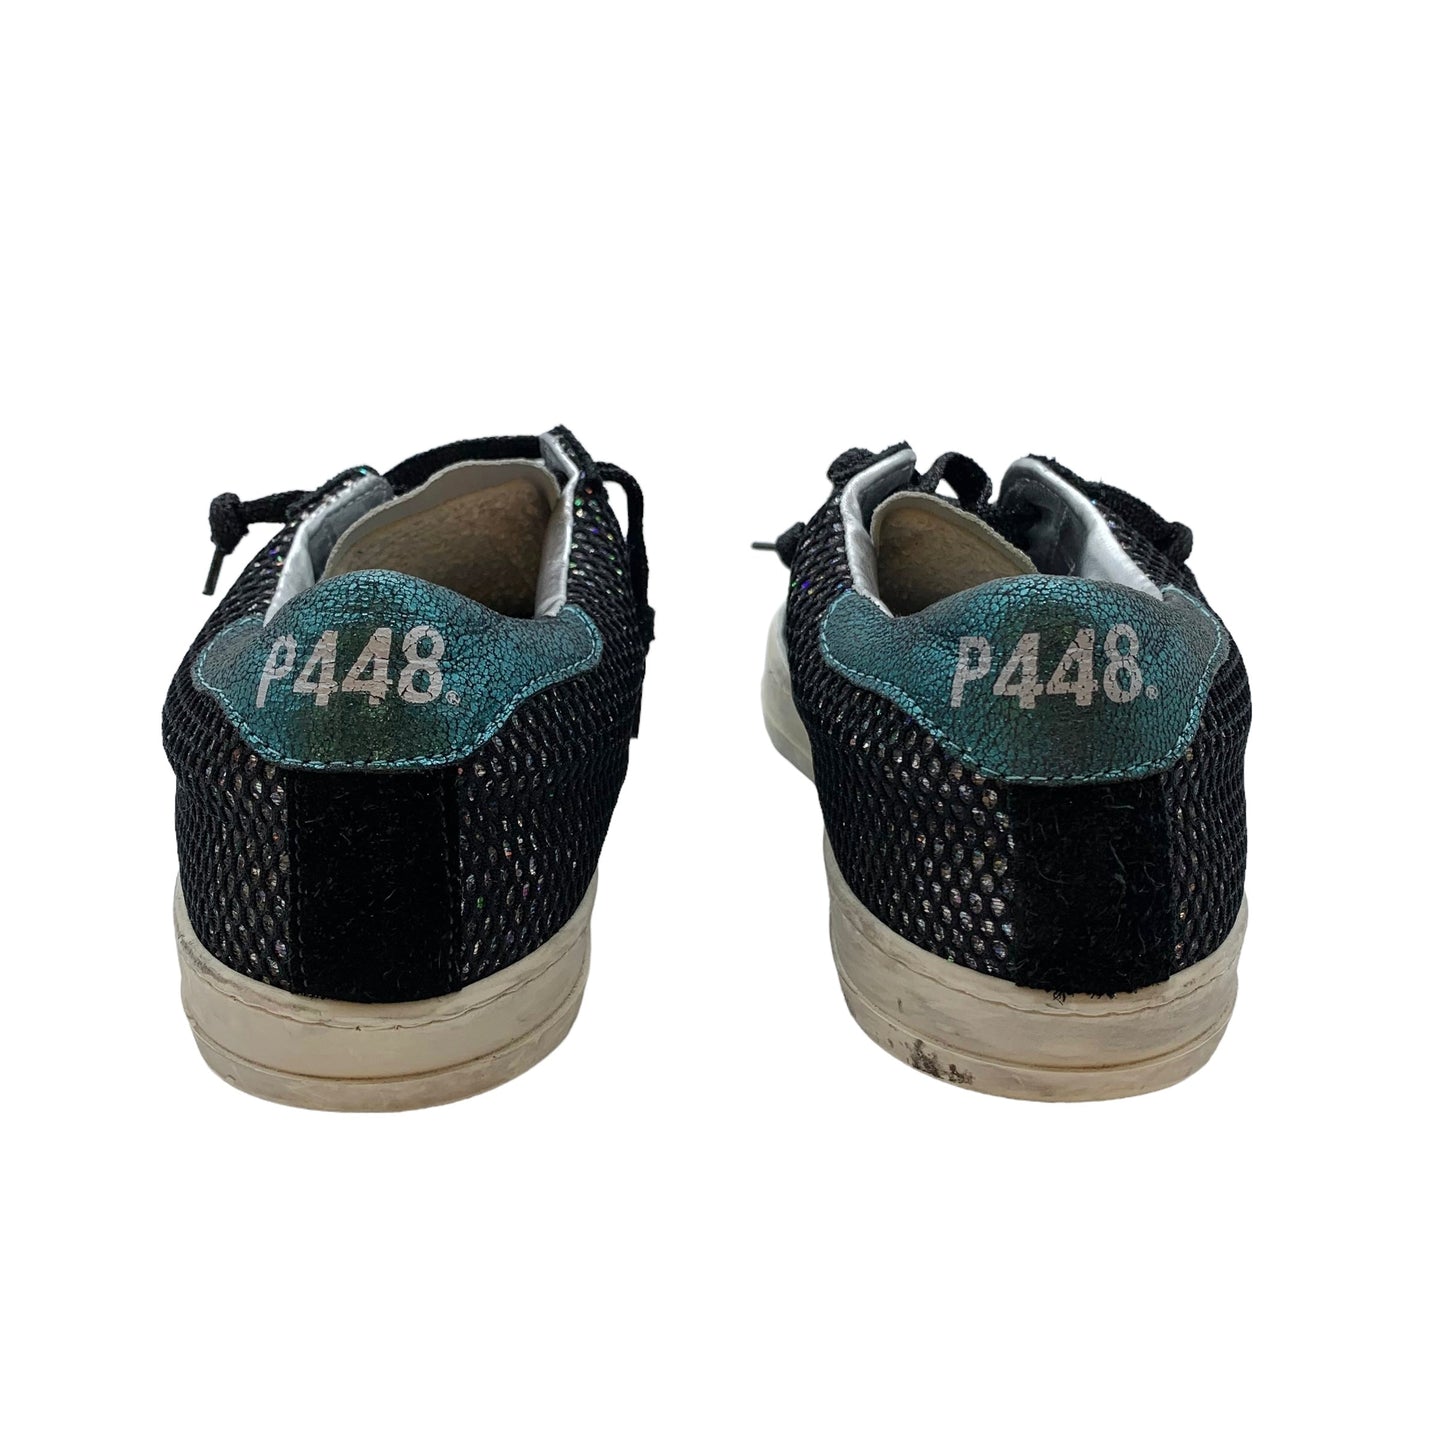 Shoes Sneakers By P448  Size: 9